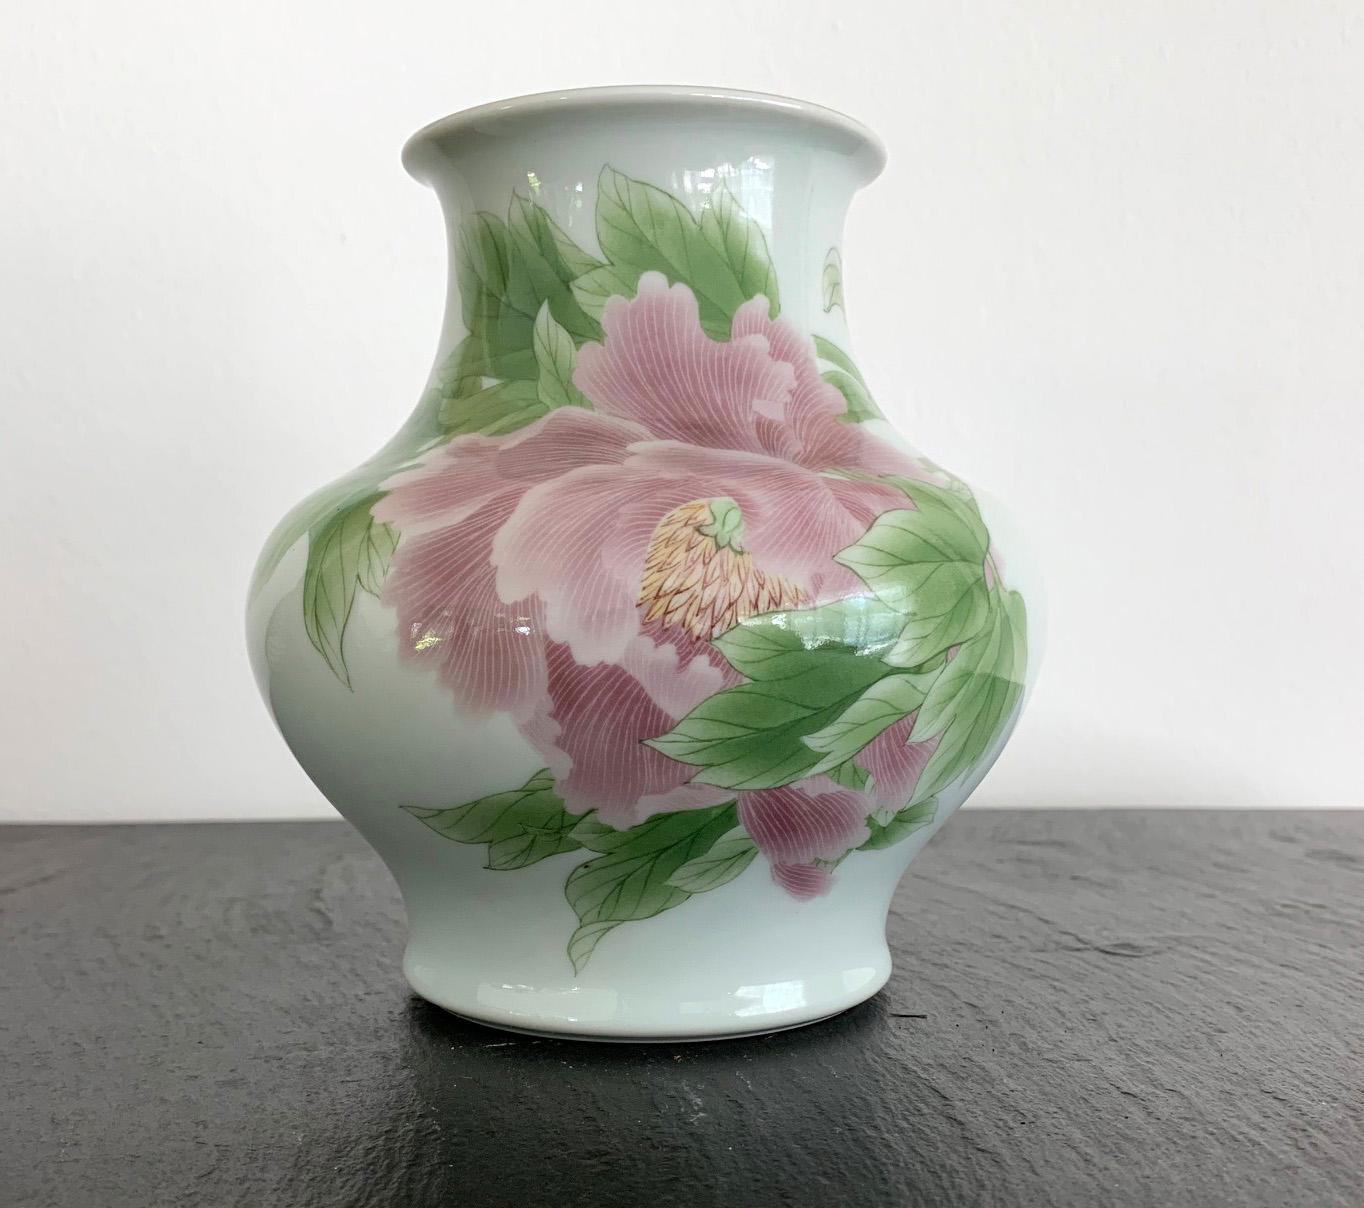 A very fine Japanese porcelain vase of Meiji Period with in classic baluster shape with peony design by Miyagawa Kozan (1842–1916), one of the most established and collected Japanese ceramist from Meiji Period. Commonly known as Makuzu Kozan, which